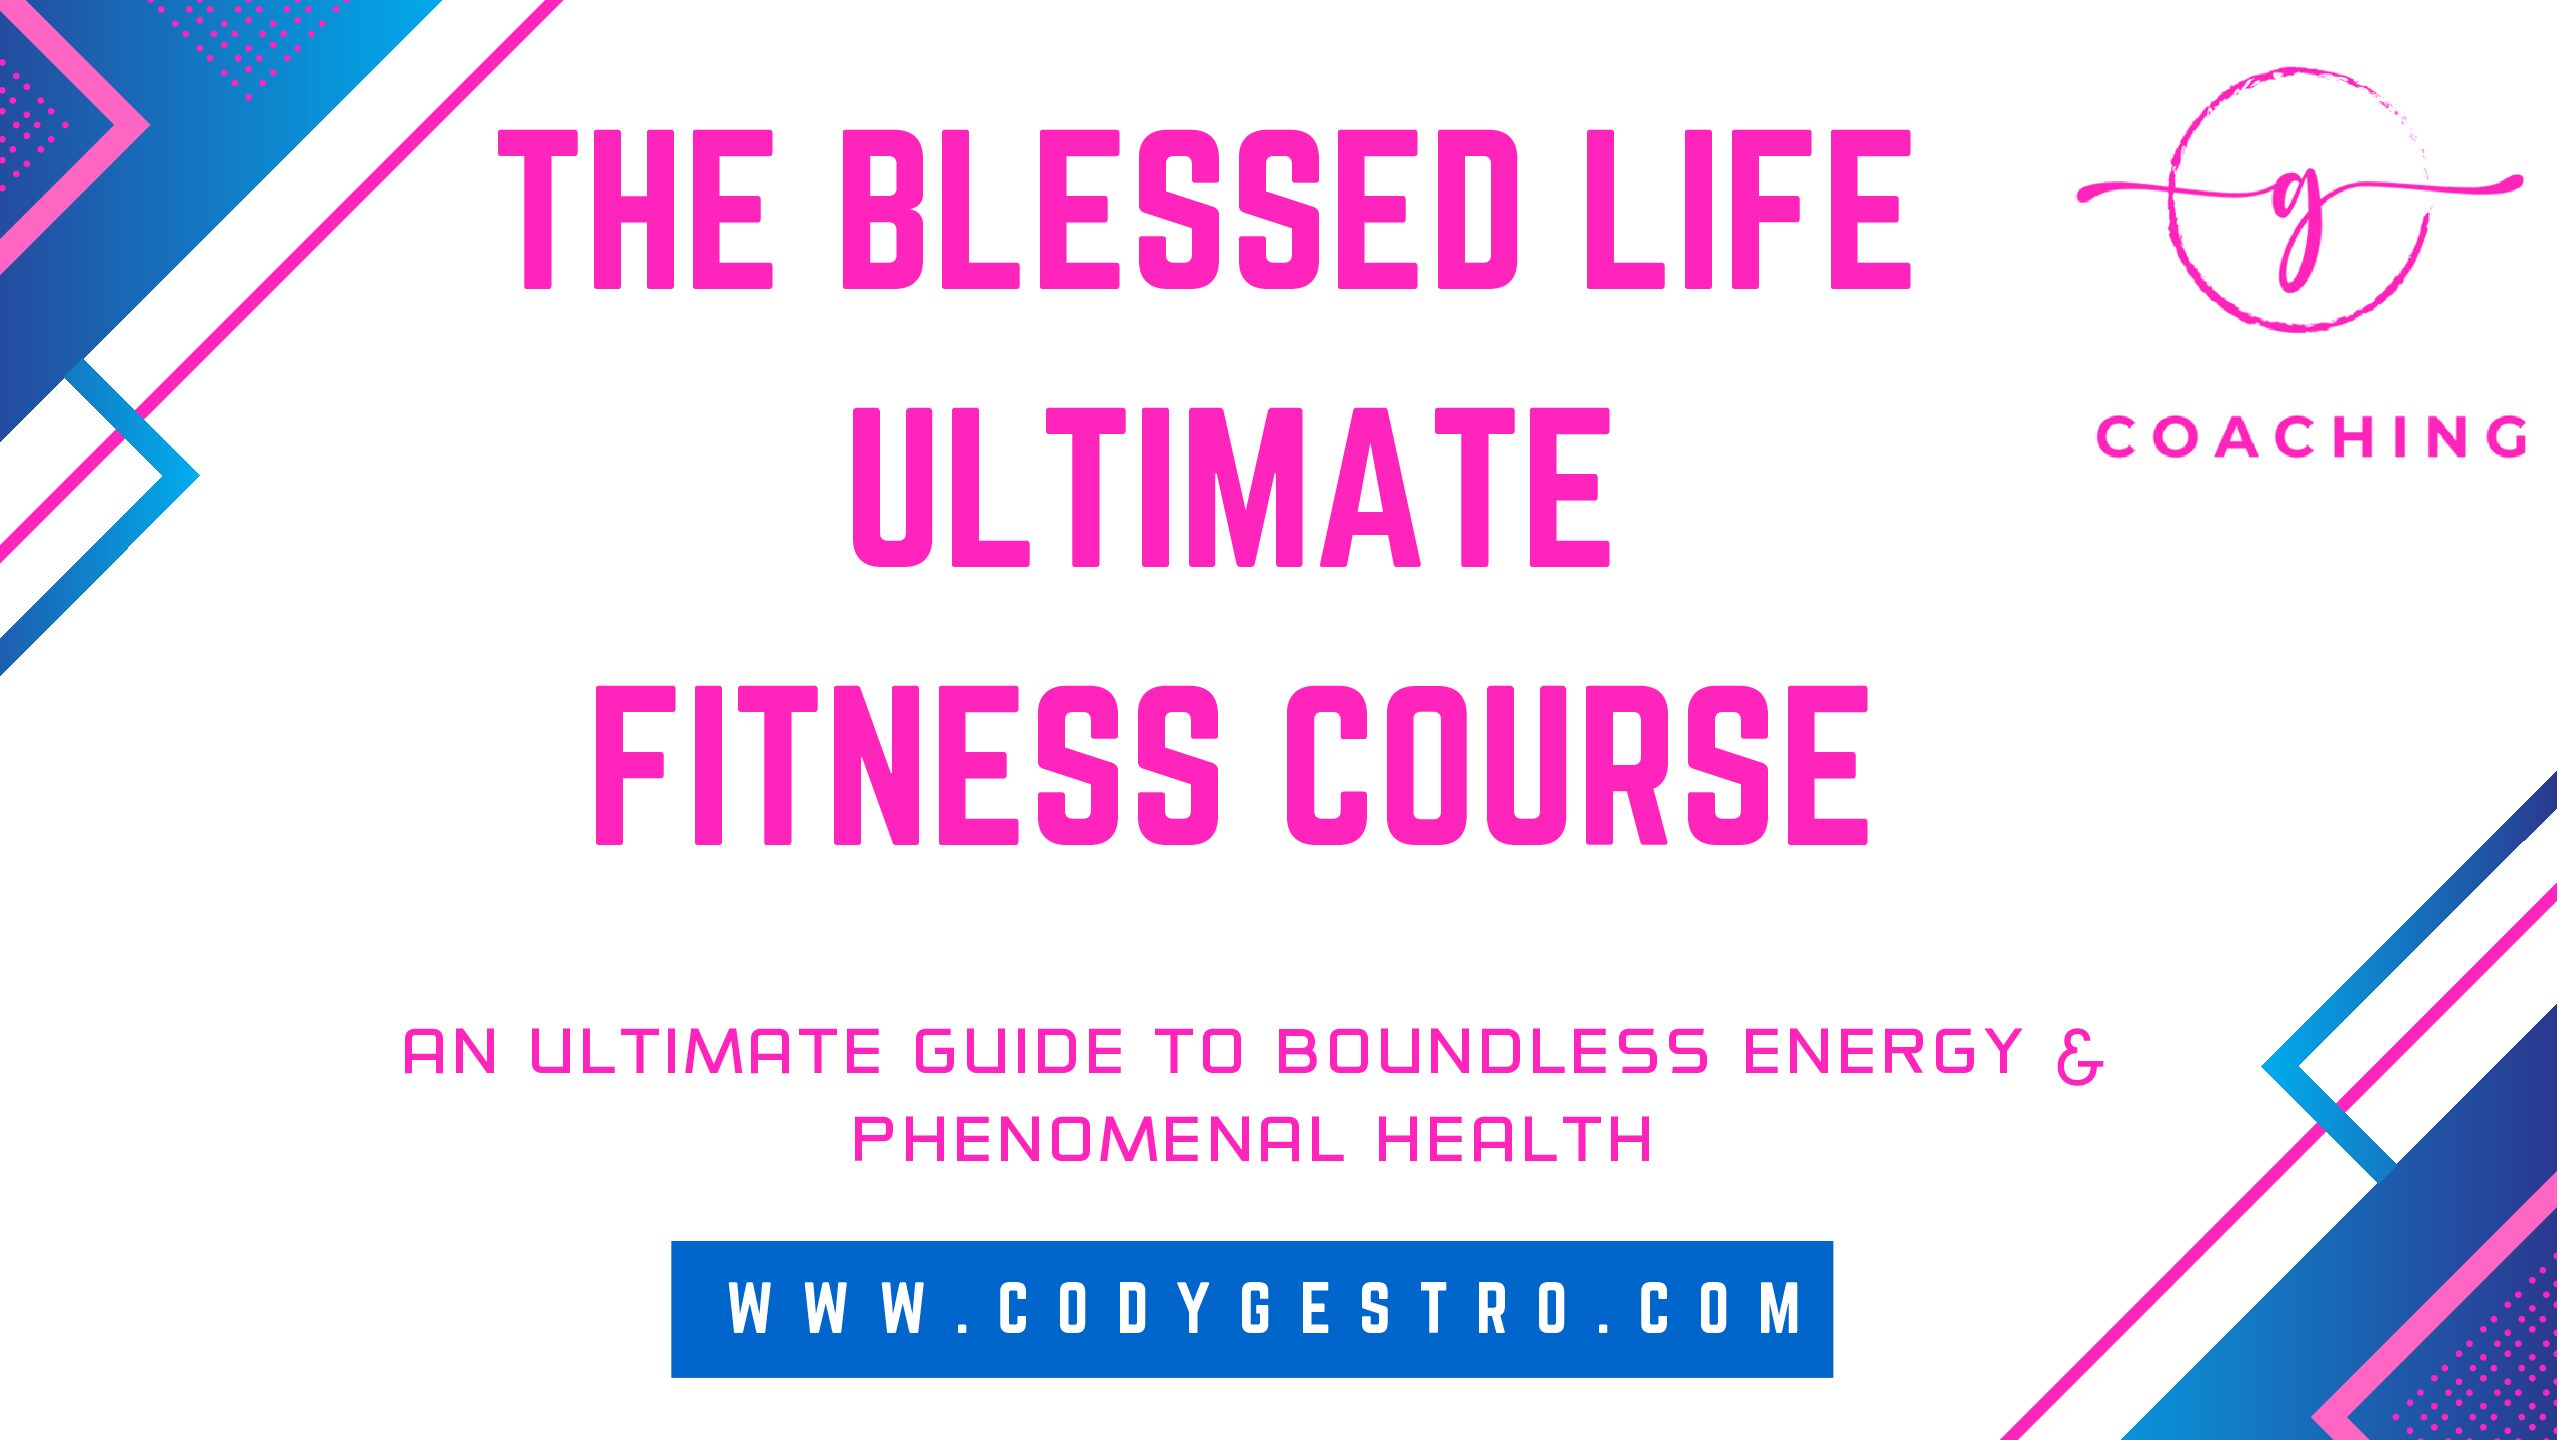 The Blessed Life Ultimate Fitness Course